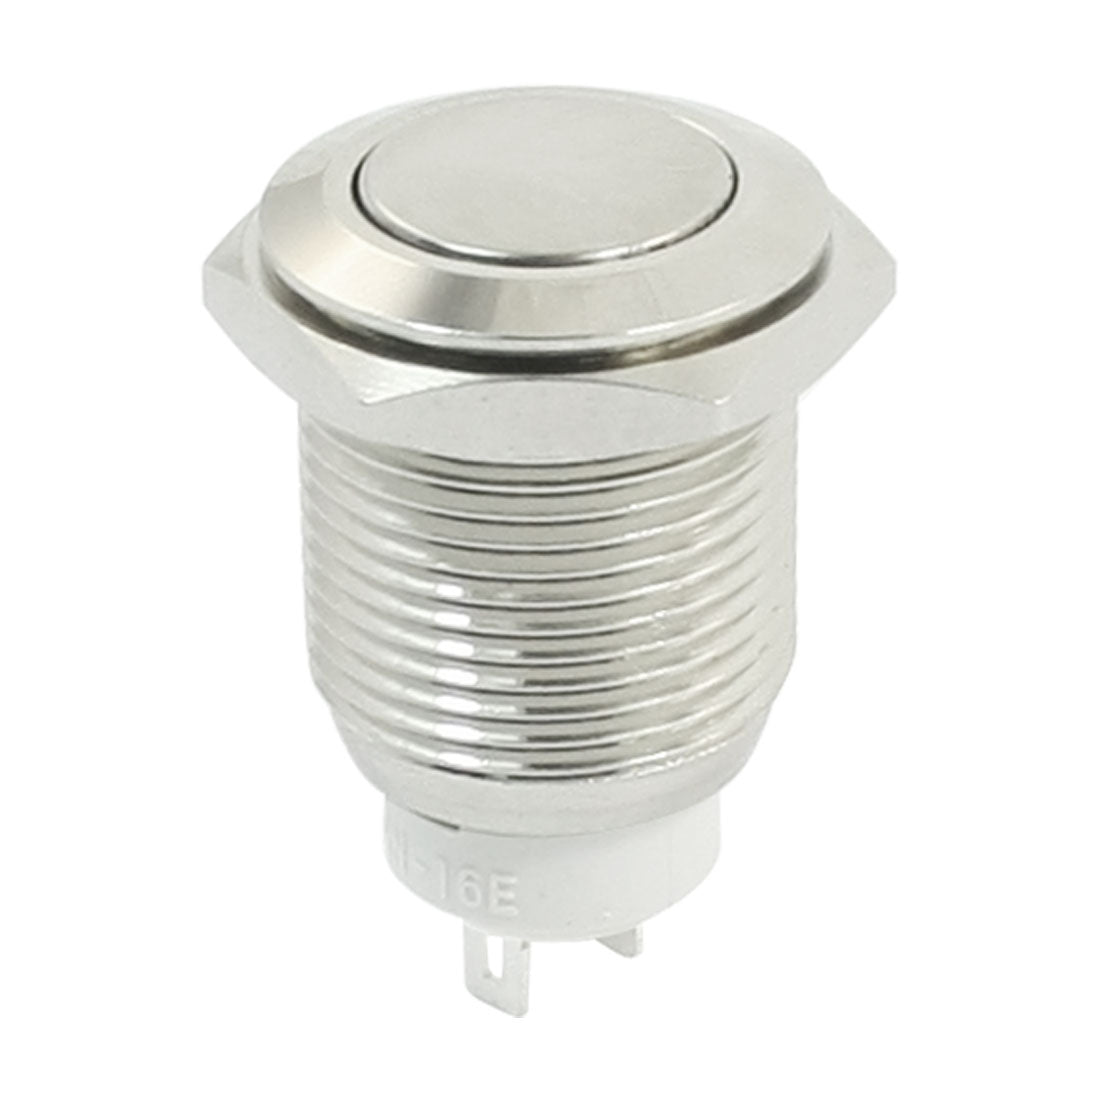 uxcell Uxcell DC 3-250V SPST Flat Head Panel Mount Latching Metal Push Button Switch 16mm Thread